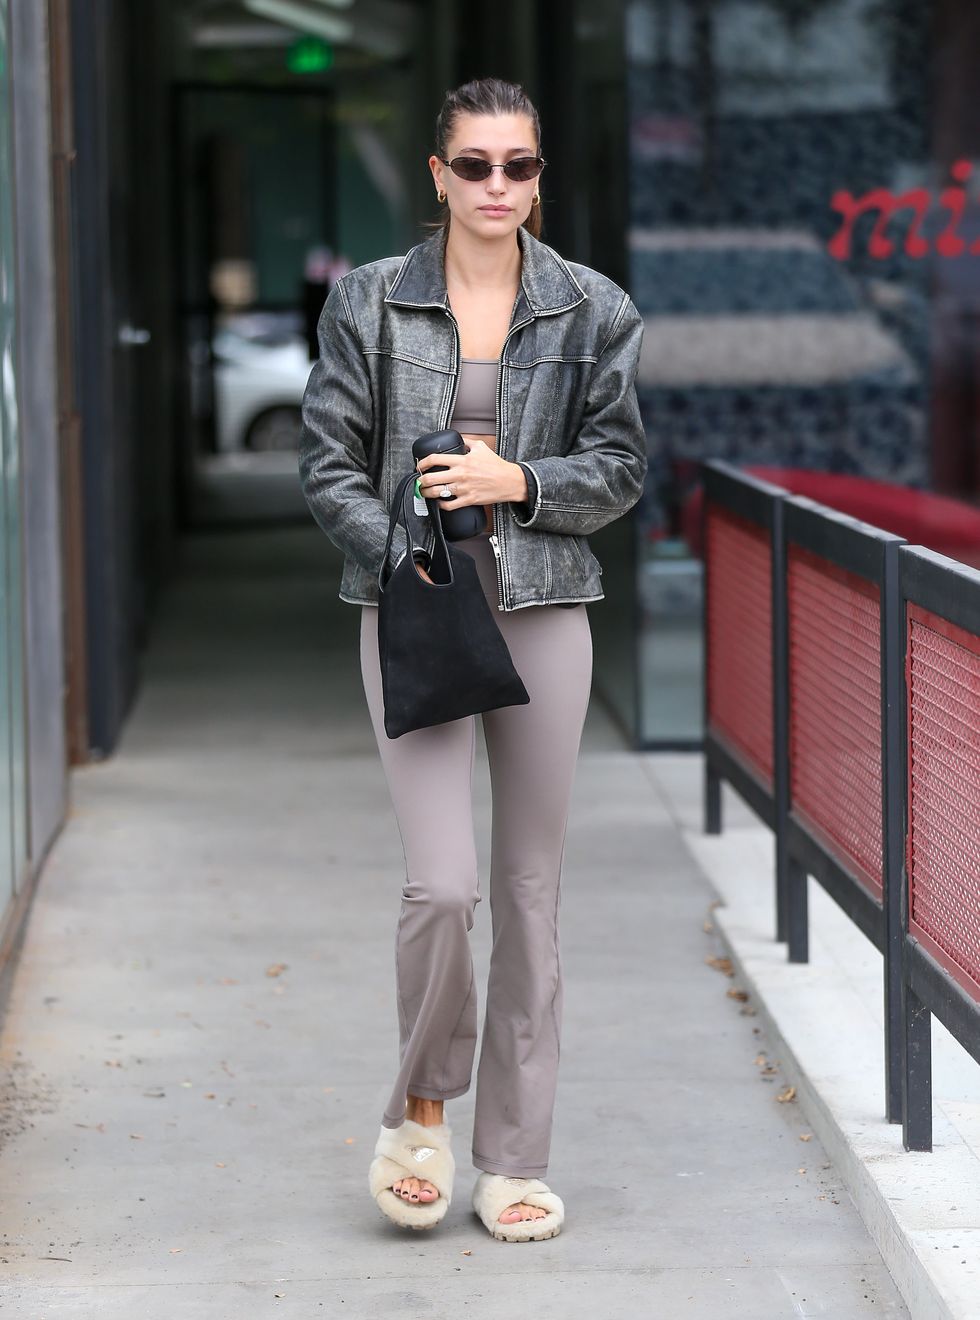 los angeles, ca   october 10 hailey bieber is seen on october 10, 2022 in los angeles, california  photo by bellocqimagesbauer griffingc images